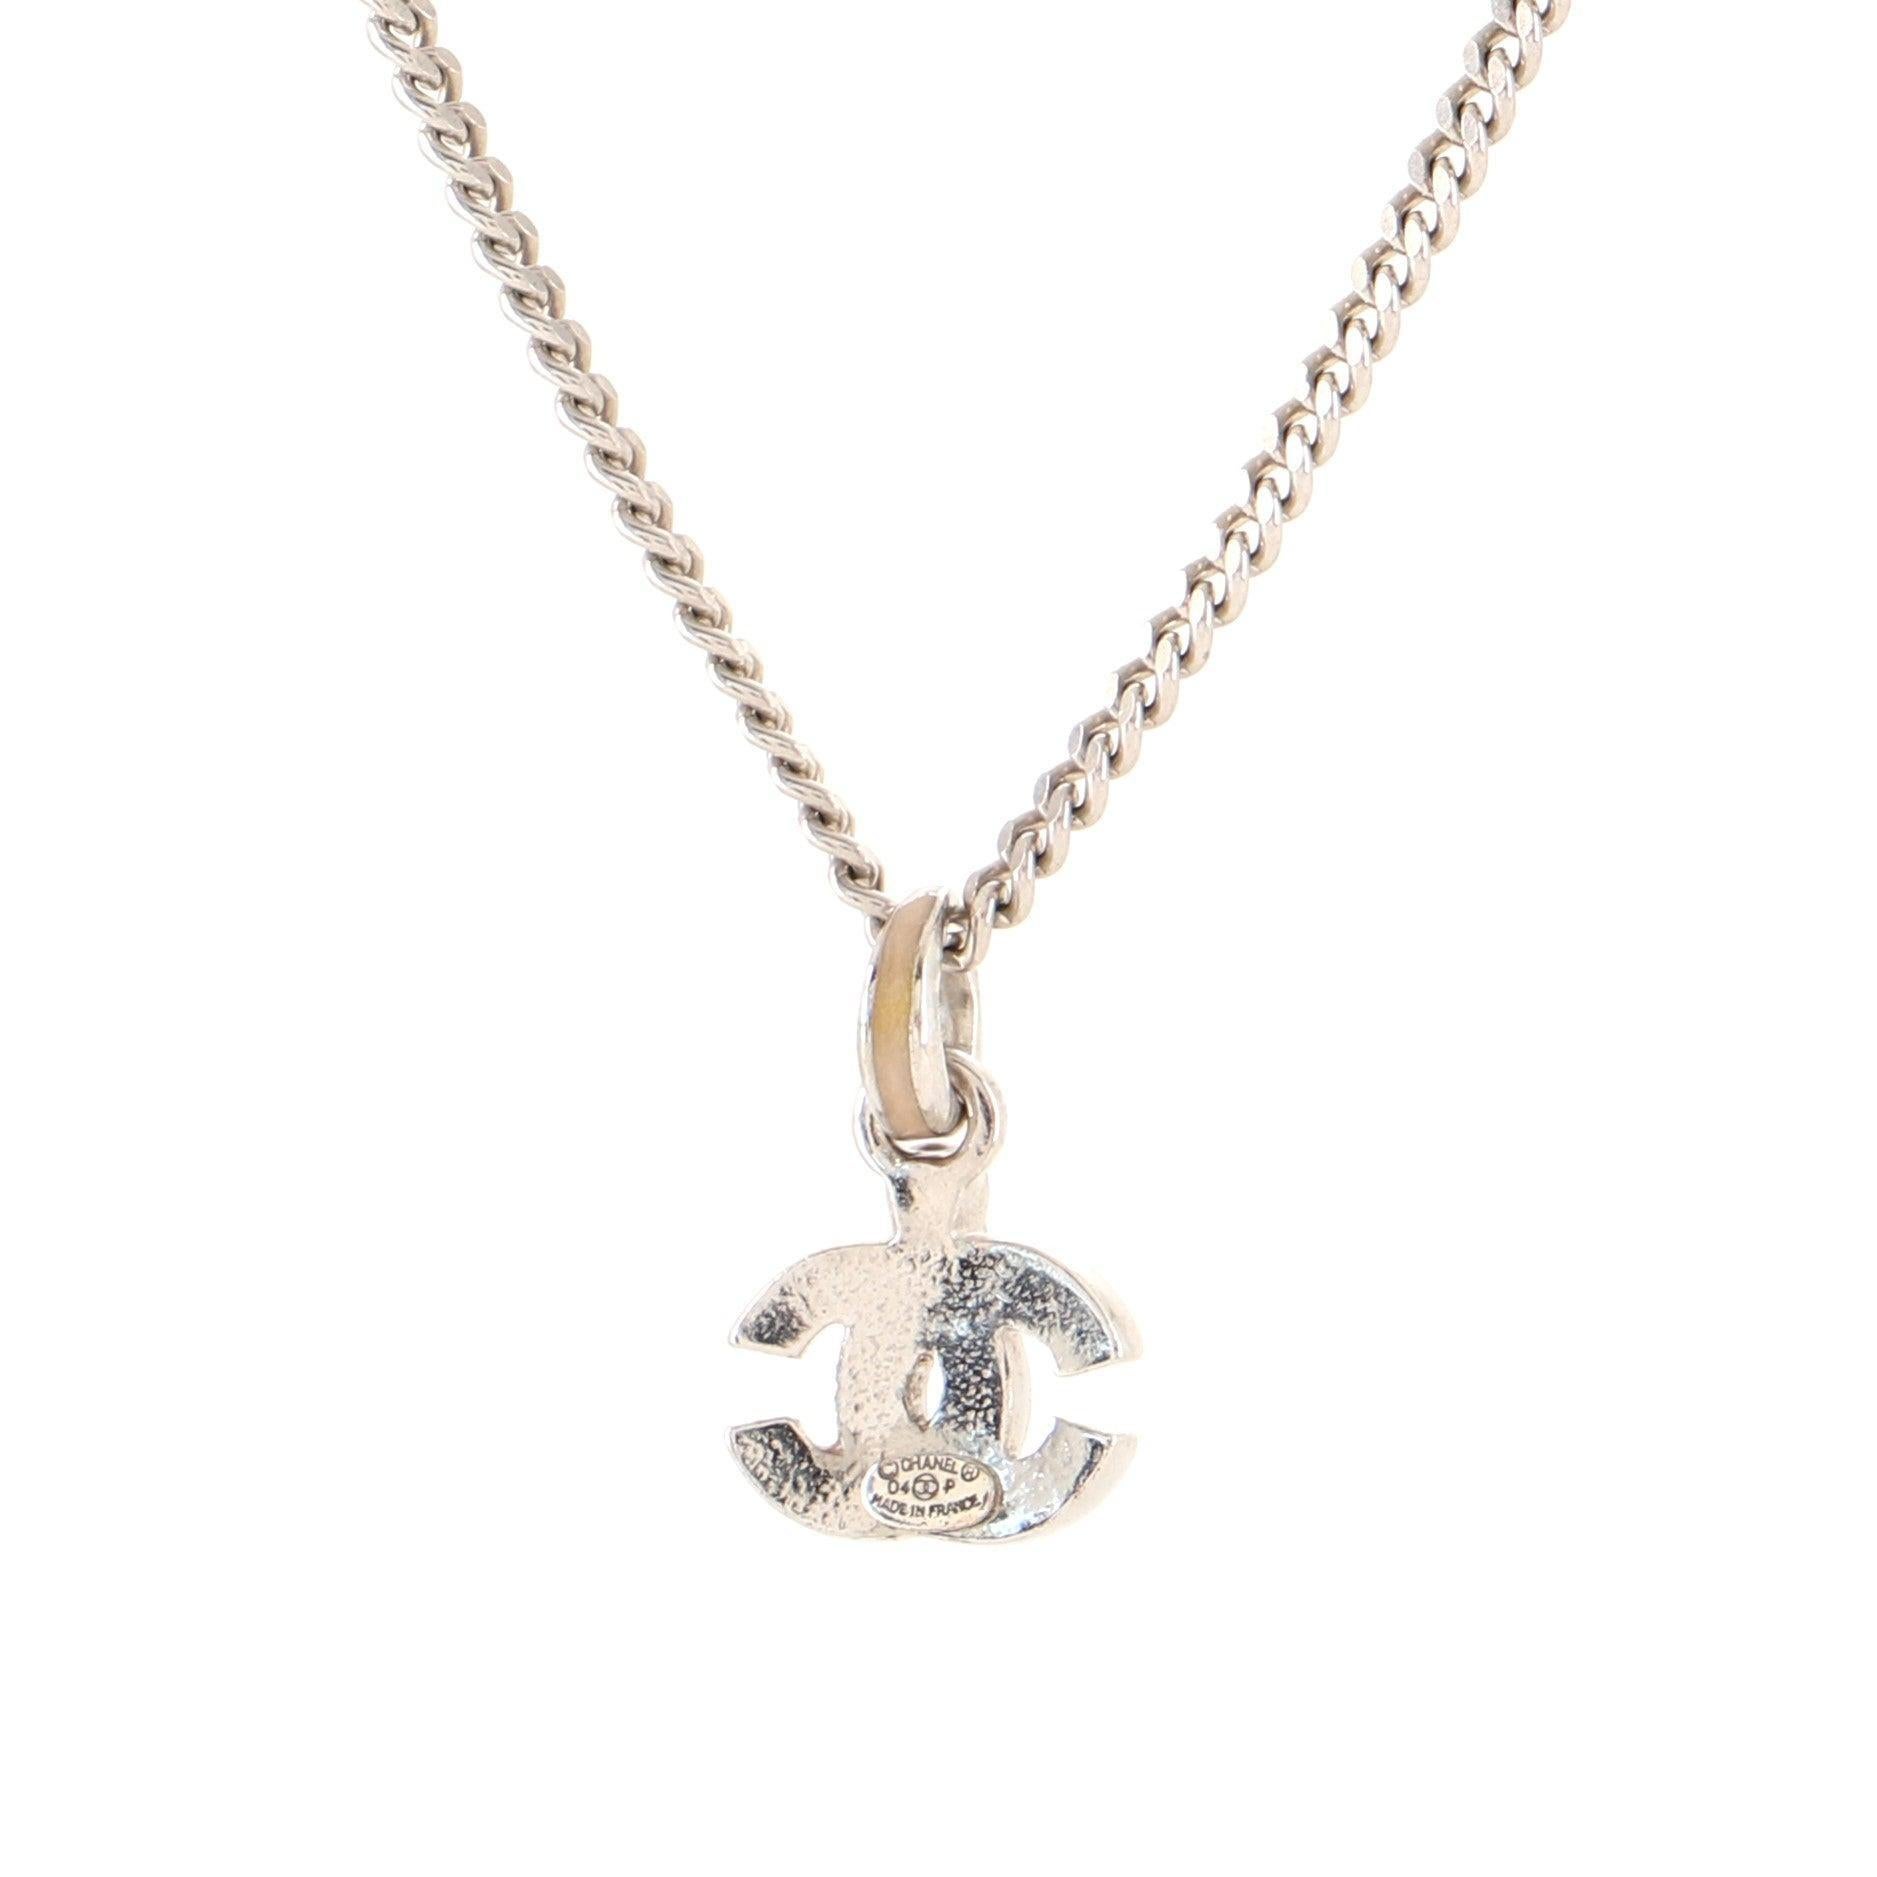 Silver-tone long chain Chanel CC necklace features a solid CC logo enamel pendant and spring ring closure.



63581MSC